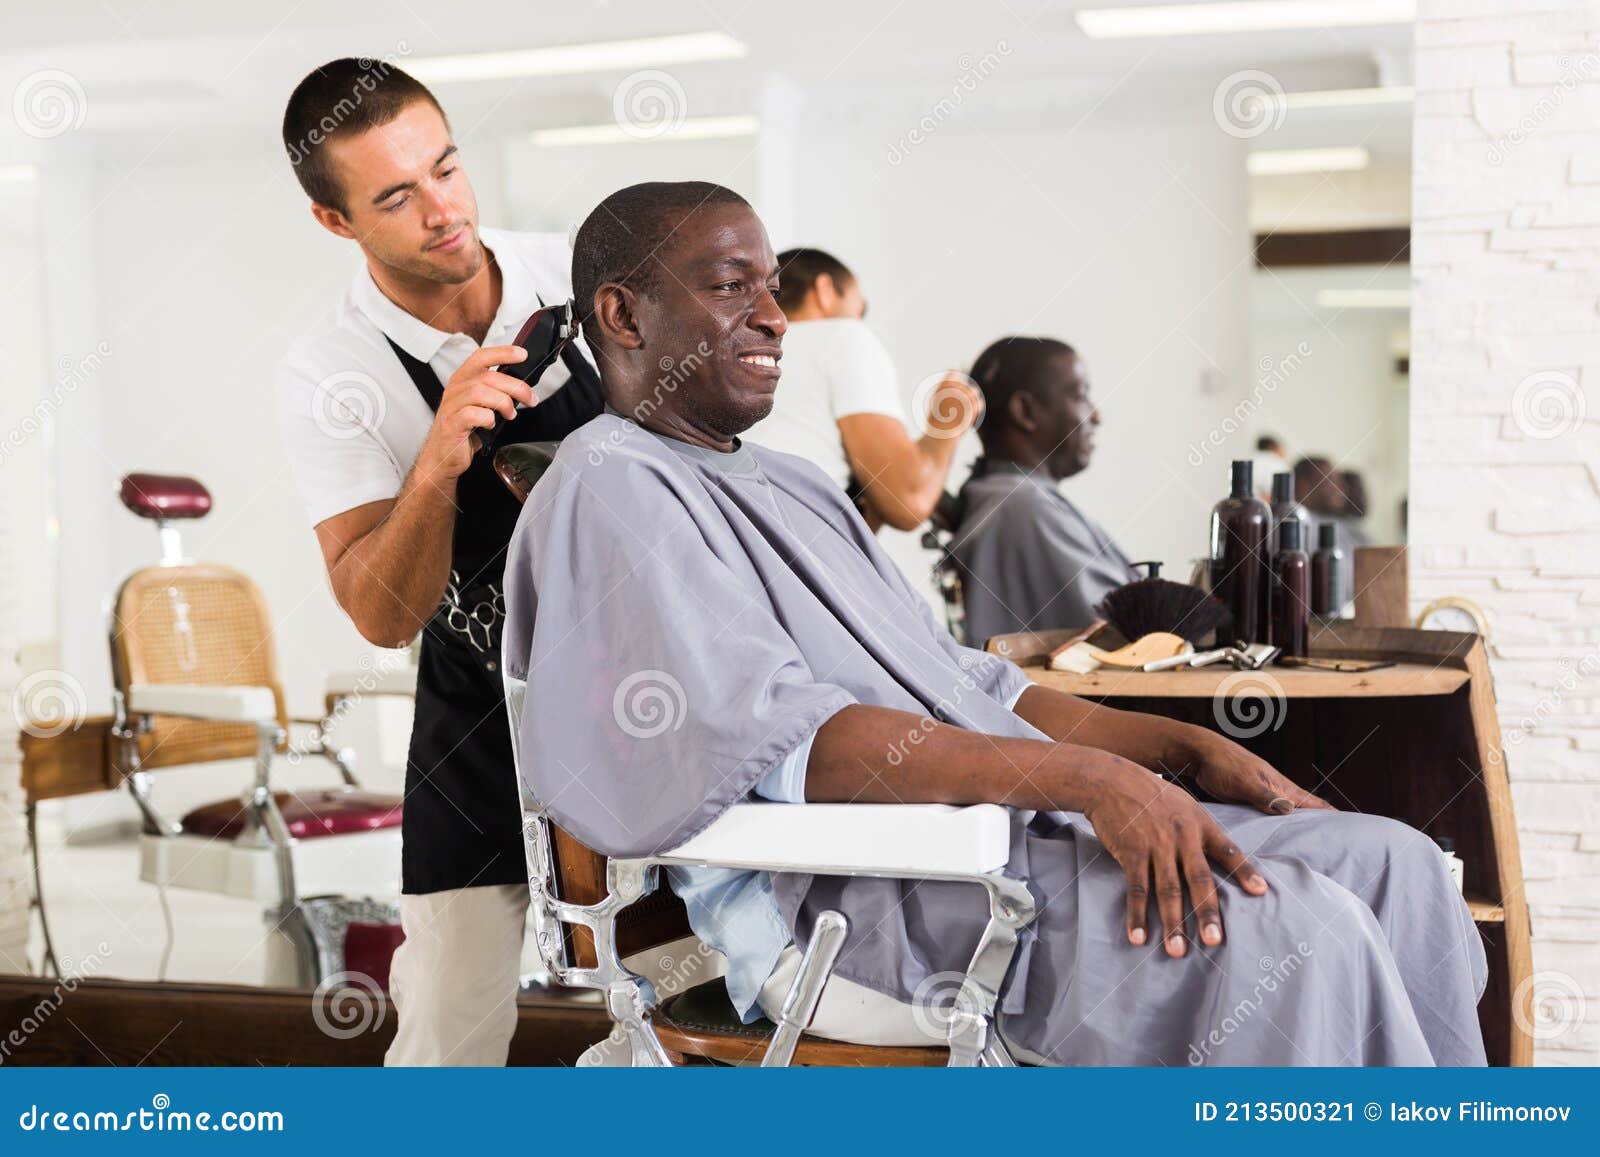 A Barber is Going through the Electric Cutting and Shaving Machine for the  Beard of an African-American Brazilian Boy Stock Image - Image of beauty,  business: 214303807